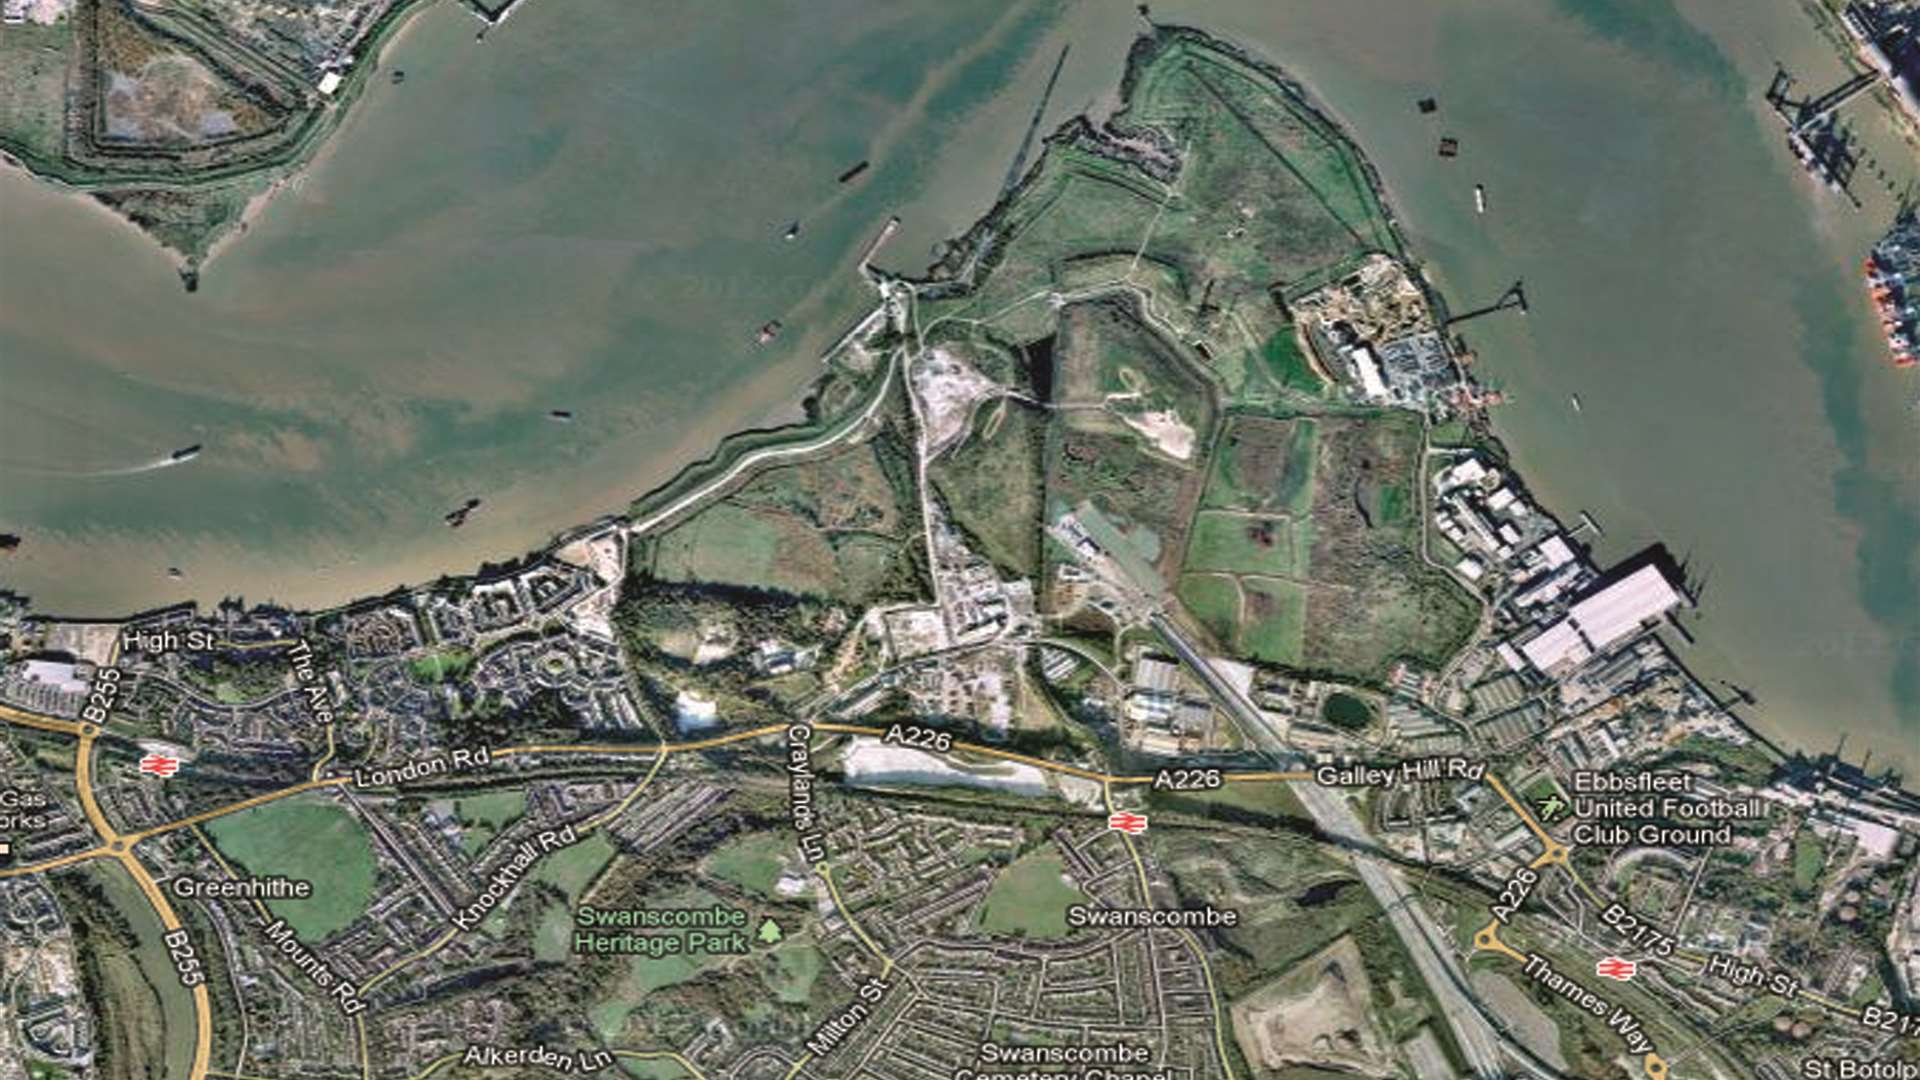 The theme park would be built on the Swanscombe Peninsula